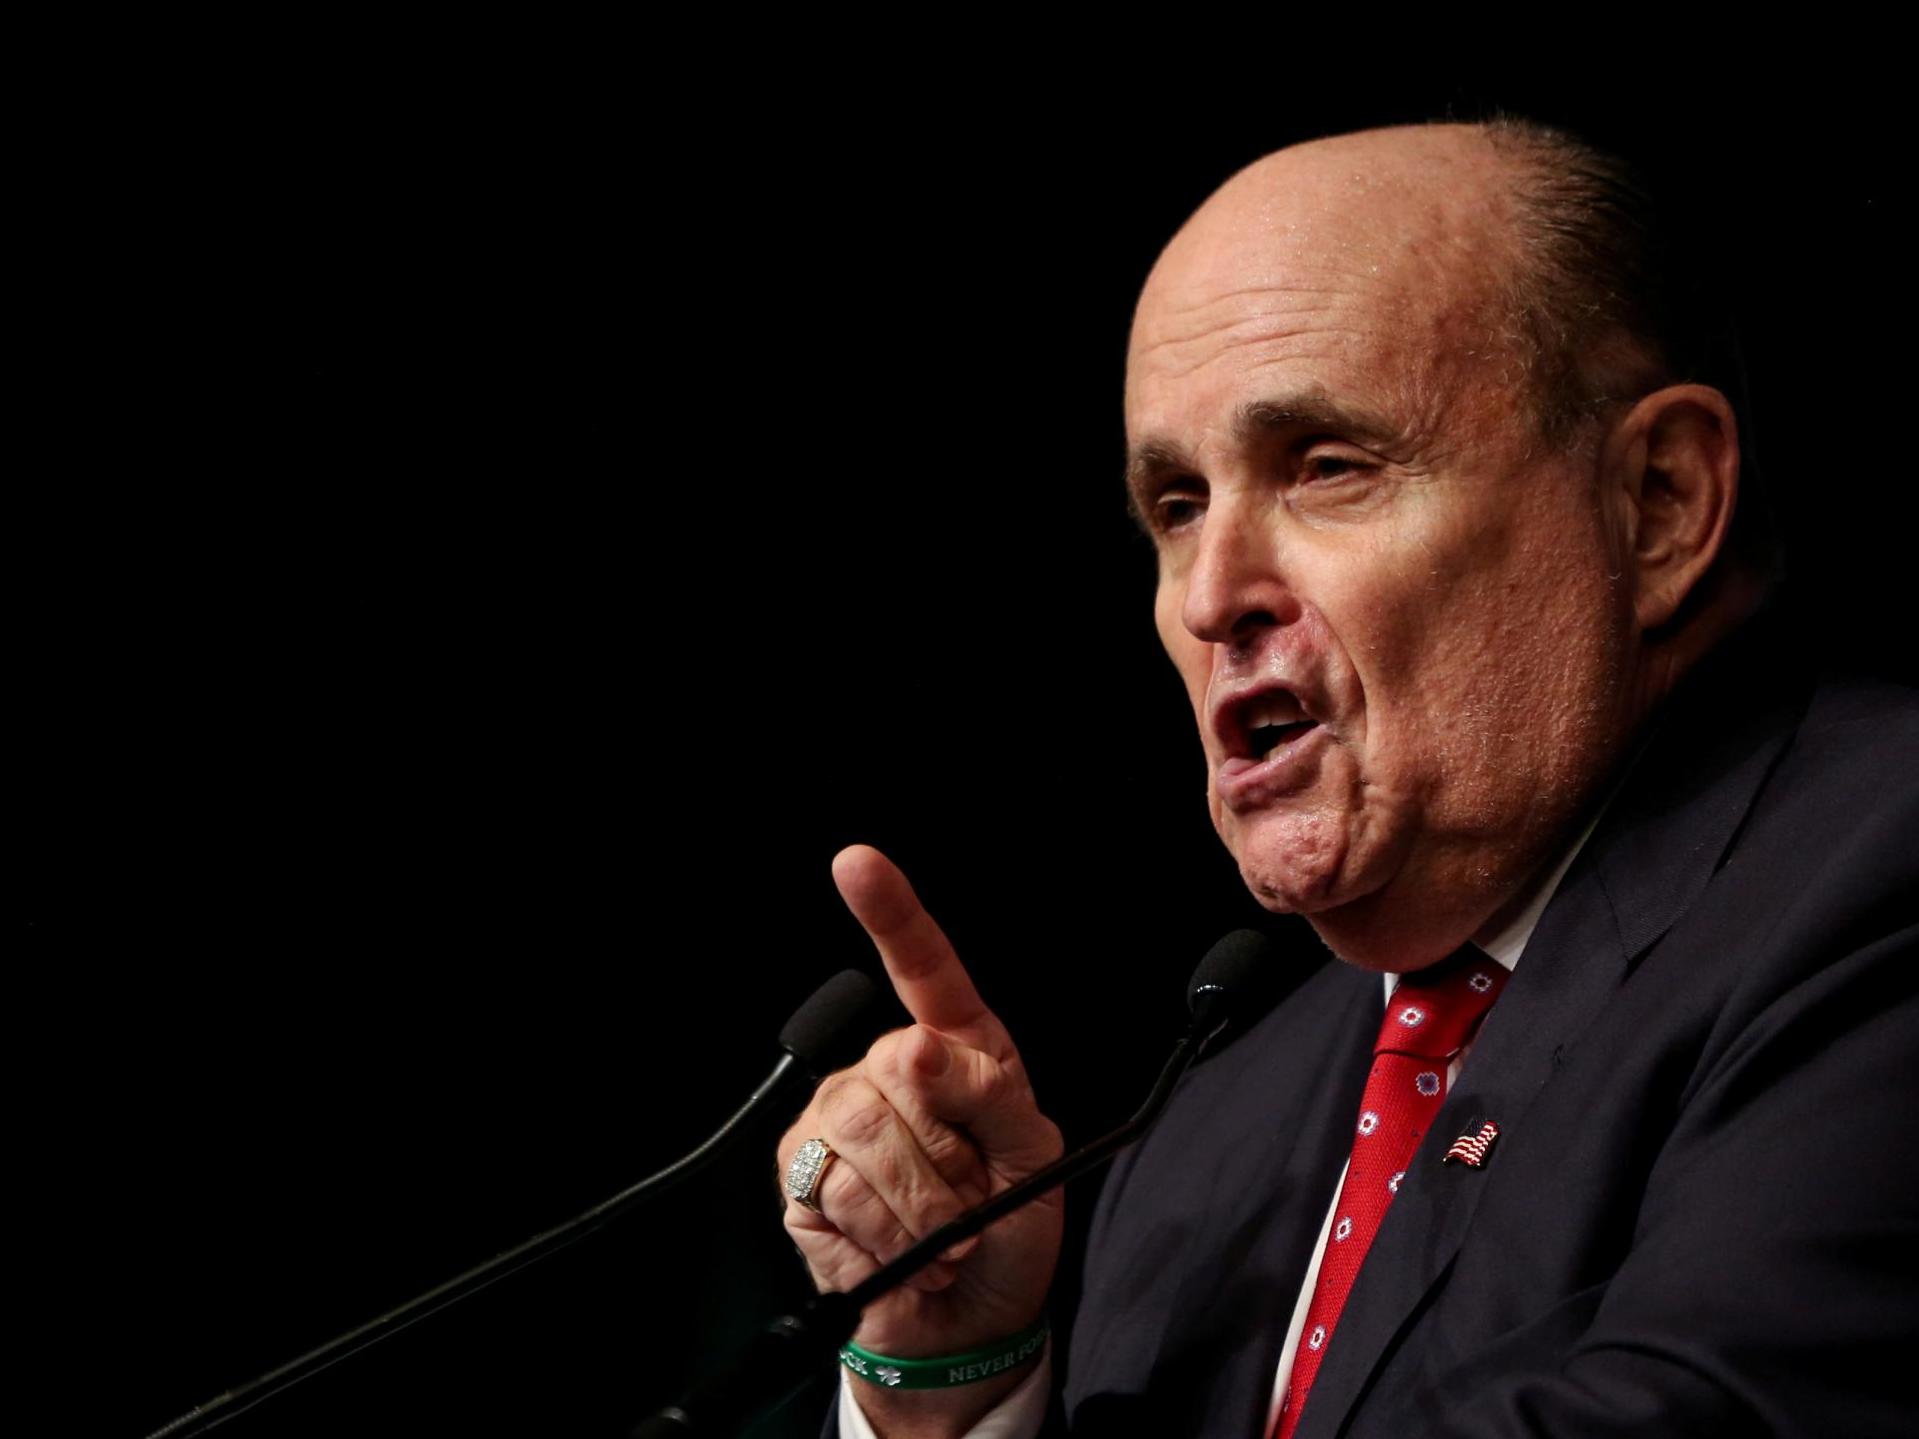 Mr Giuliani was accused in impeachment proceedings of running a shadow-foreign policy operation in Ukraine